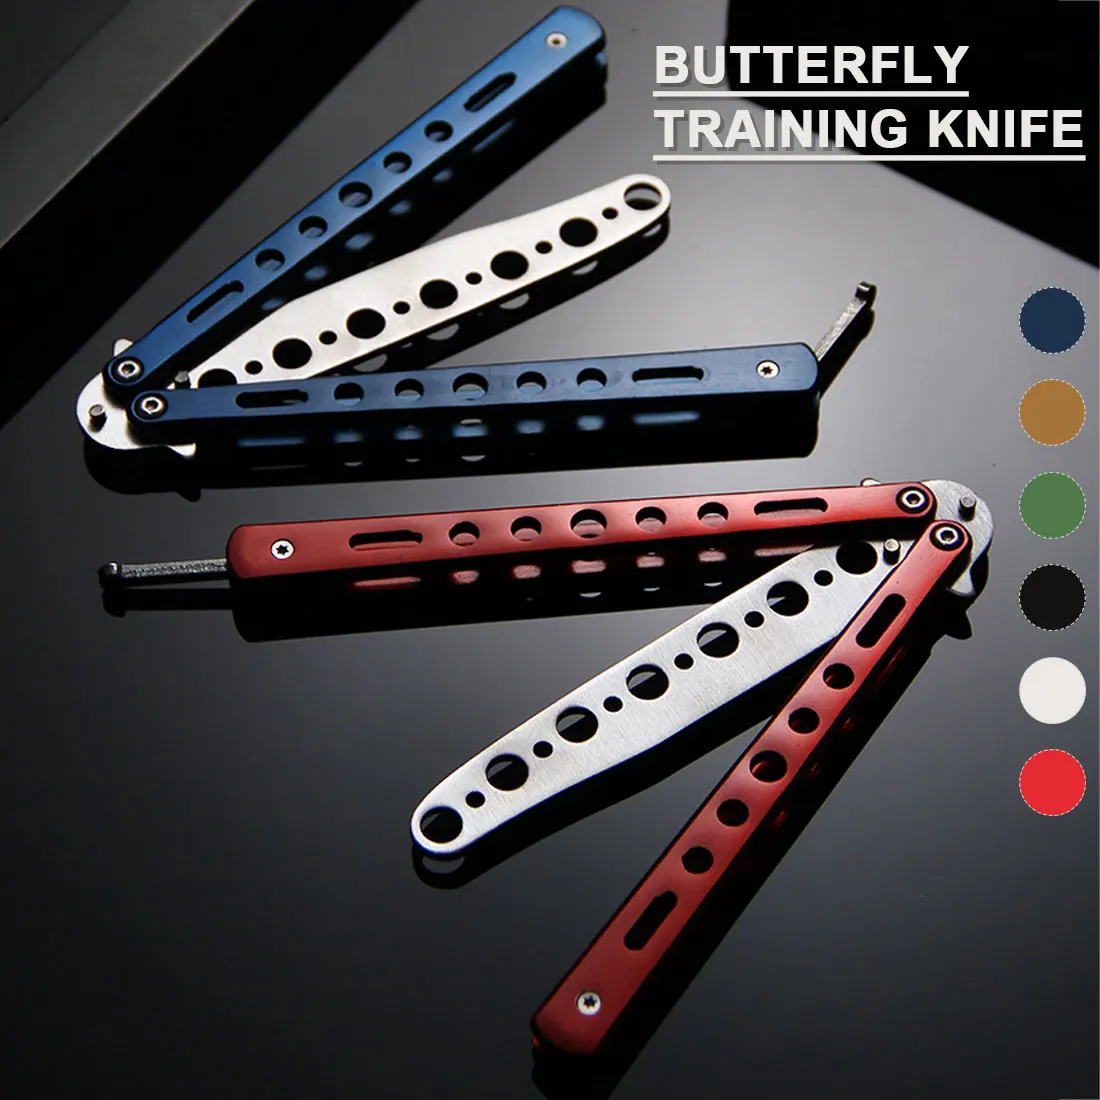 

C-27 Stainless Steel Knife Butterfly Training Knife Game Knife Dull Tool No Edge Butterfly Knife Comb Trainer Practice Hair